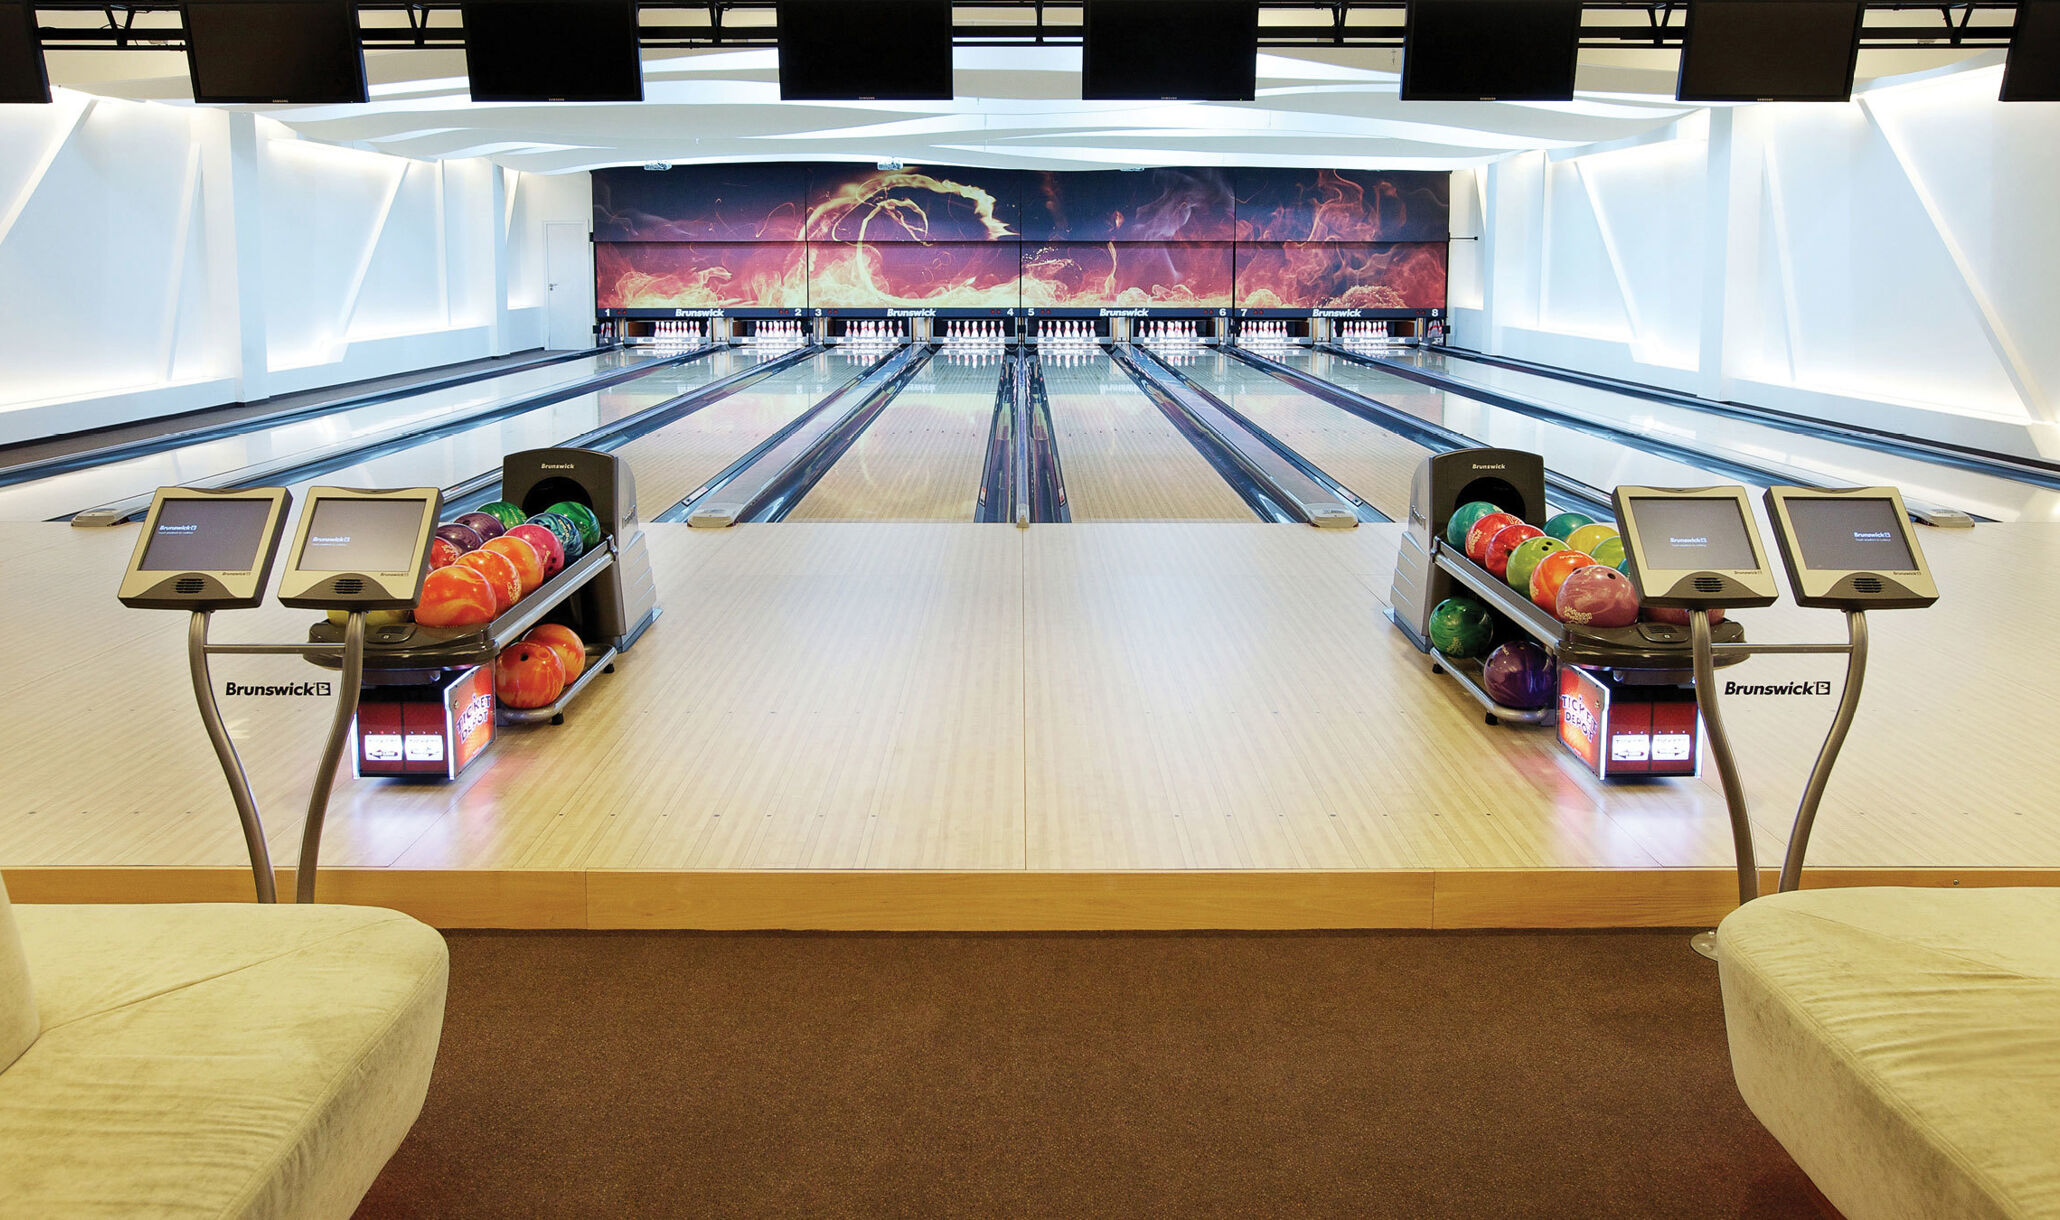 Pearl Bowling Center Budapest Hungary 16X9 09-2